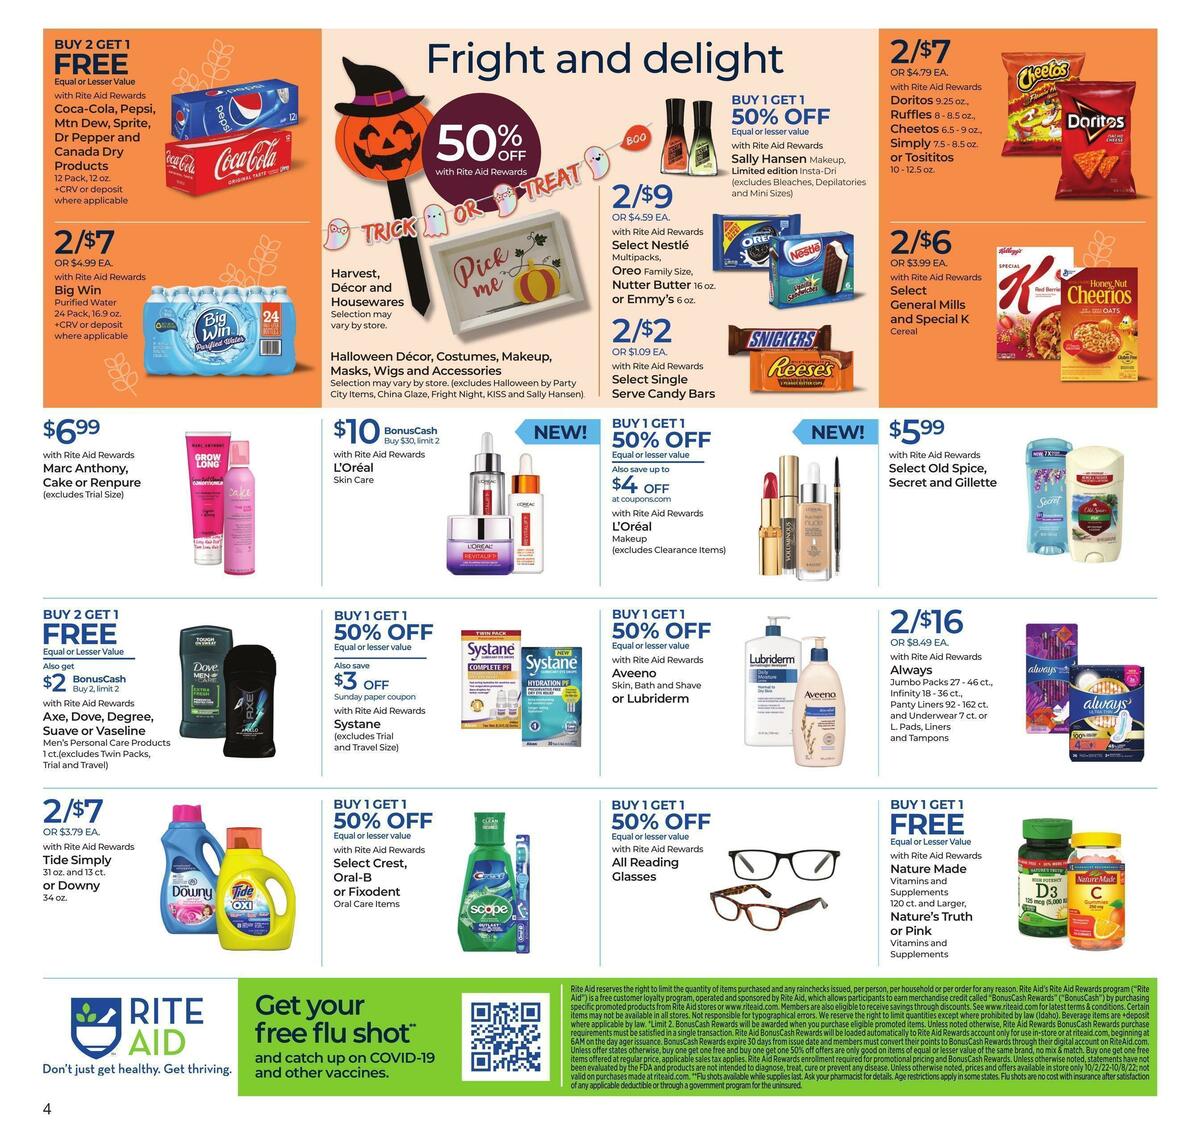 Rite Aid Weekly Ad from October 2